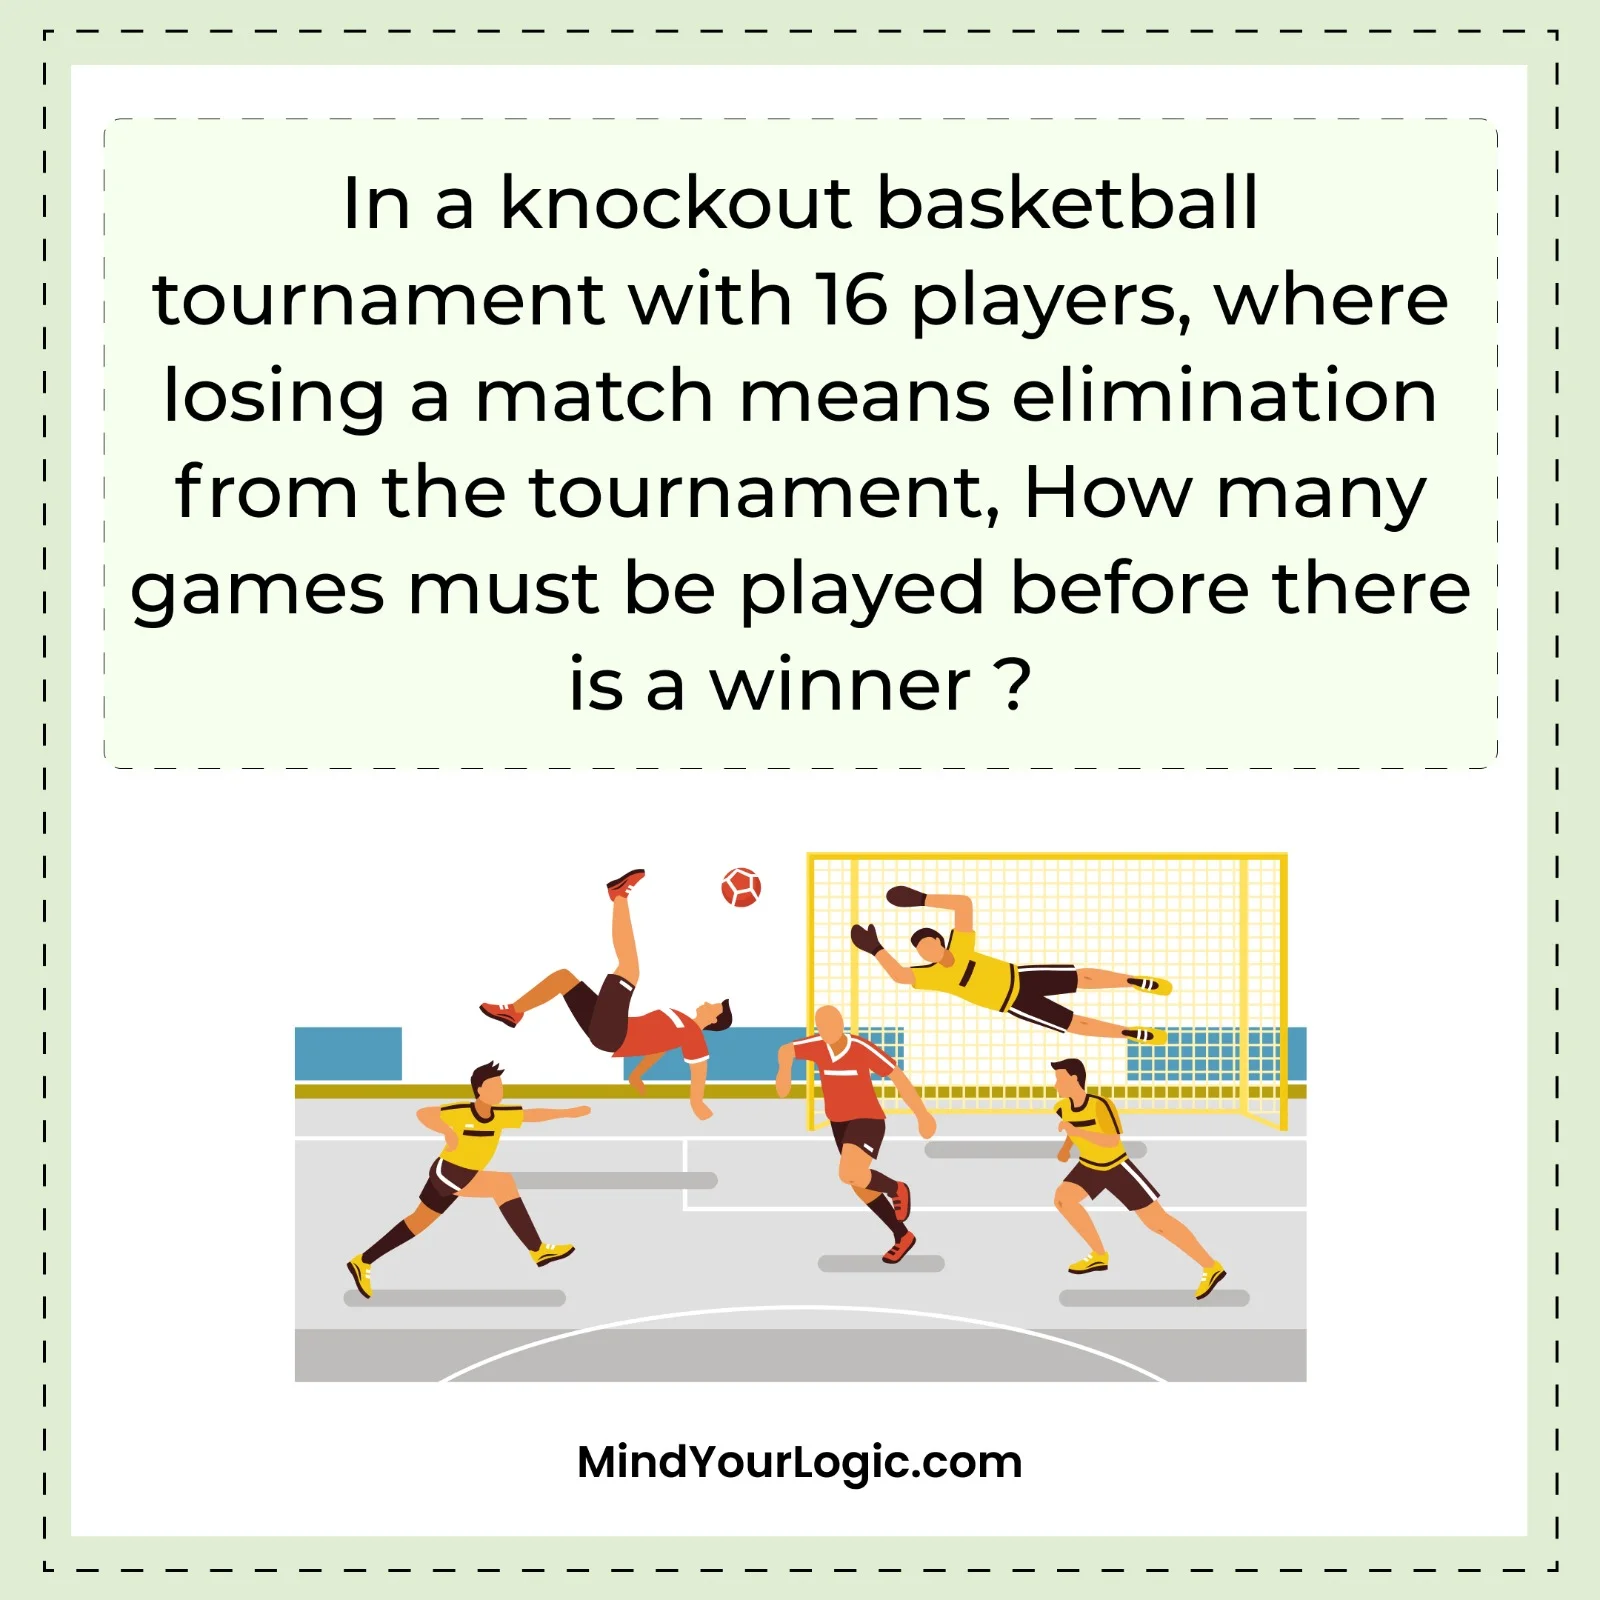 math-challenge-how-many-games-must-be-played-in-knockout-basketball-tournament